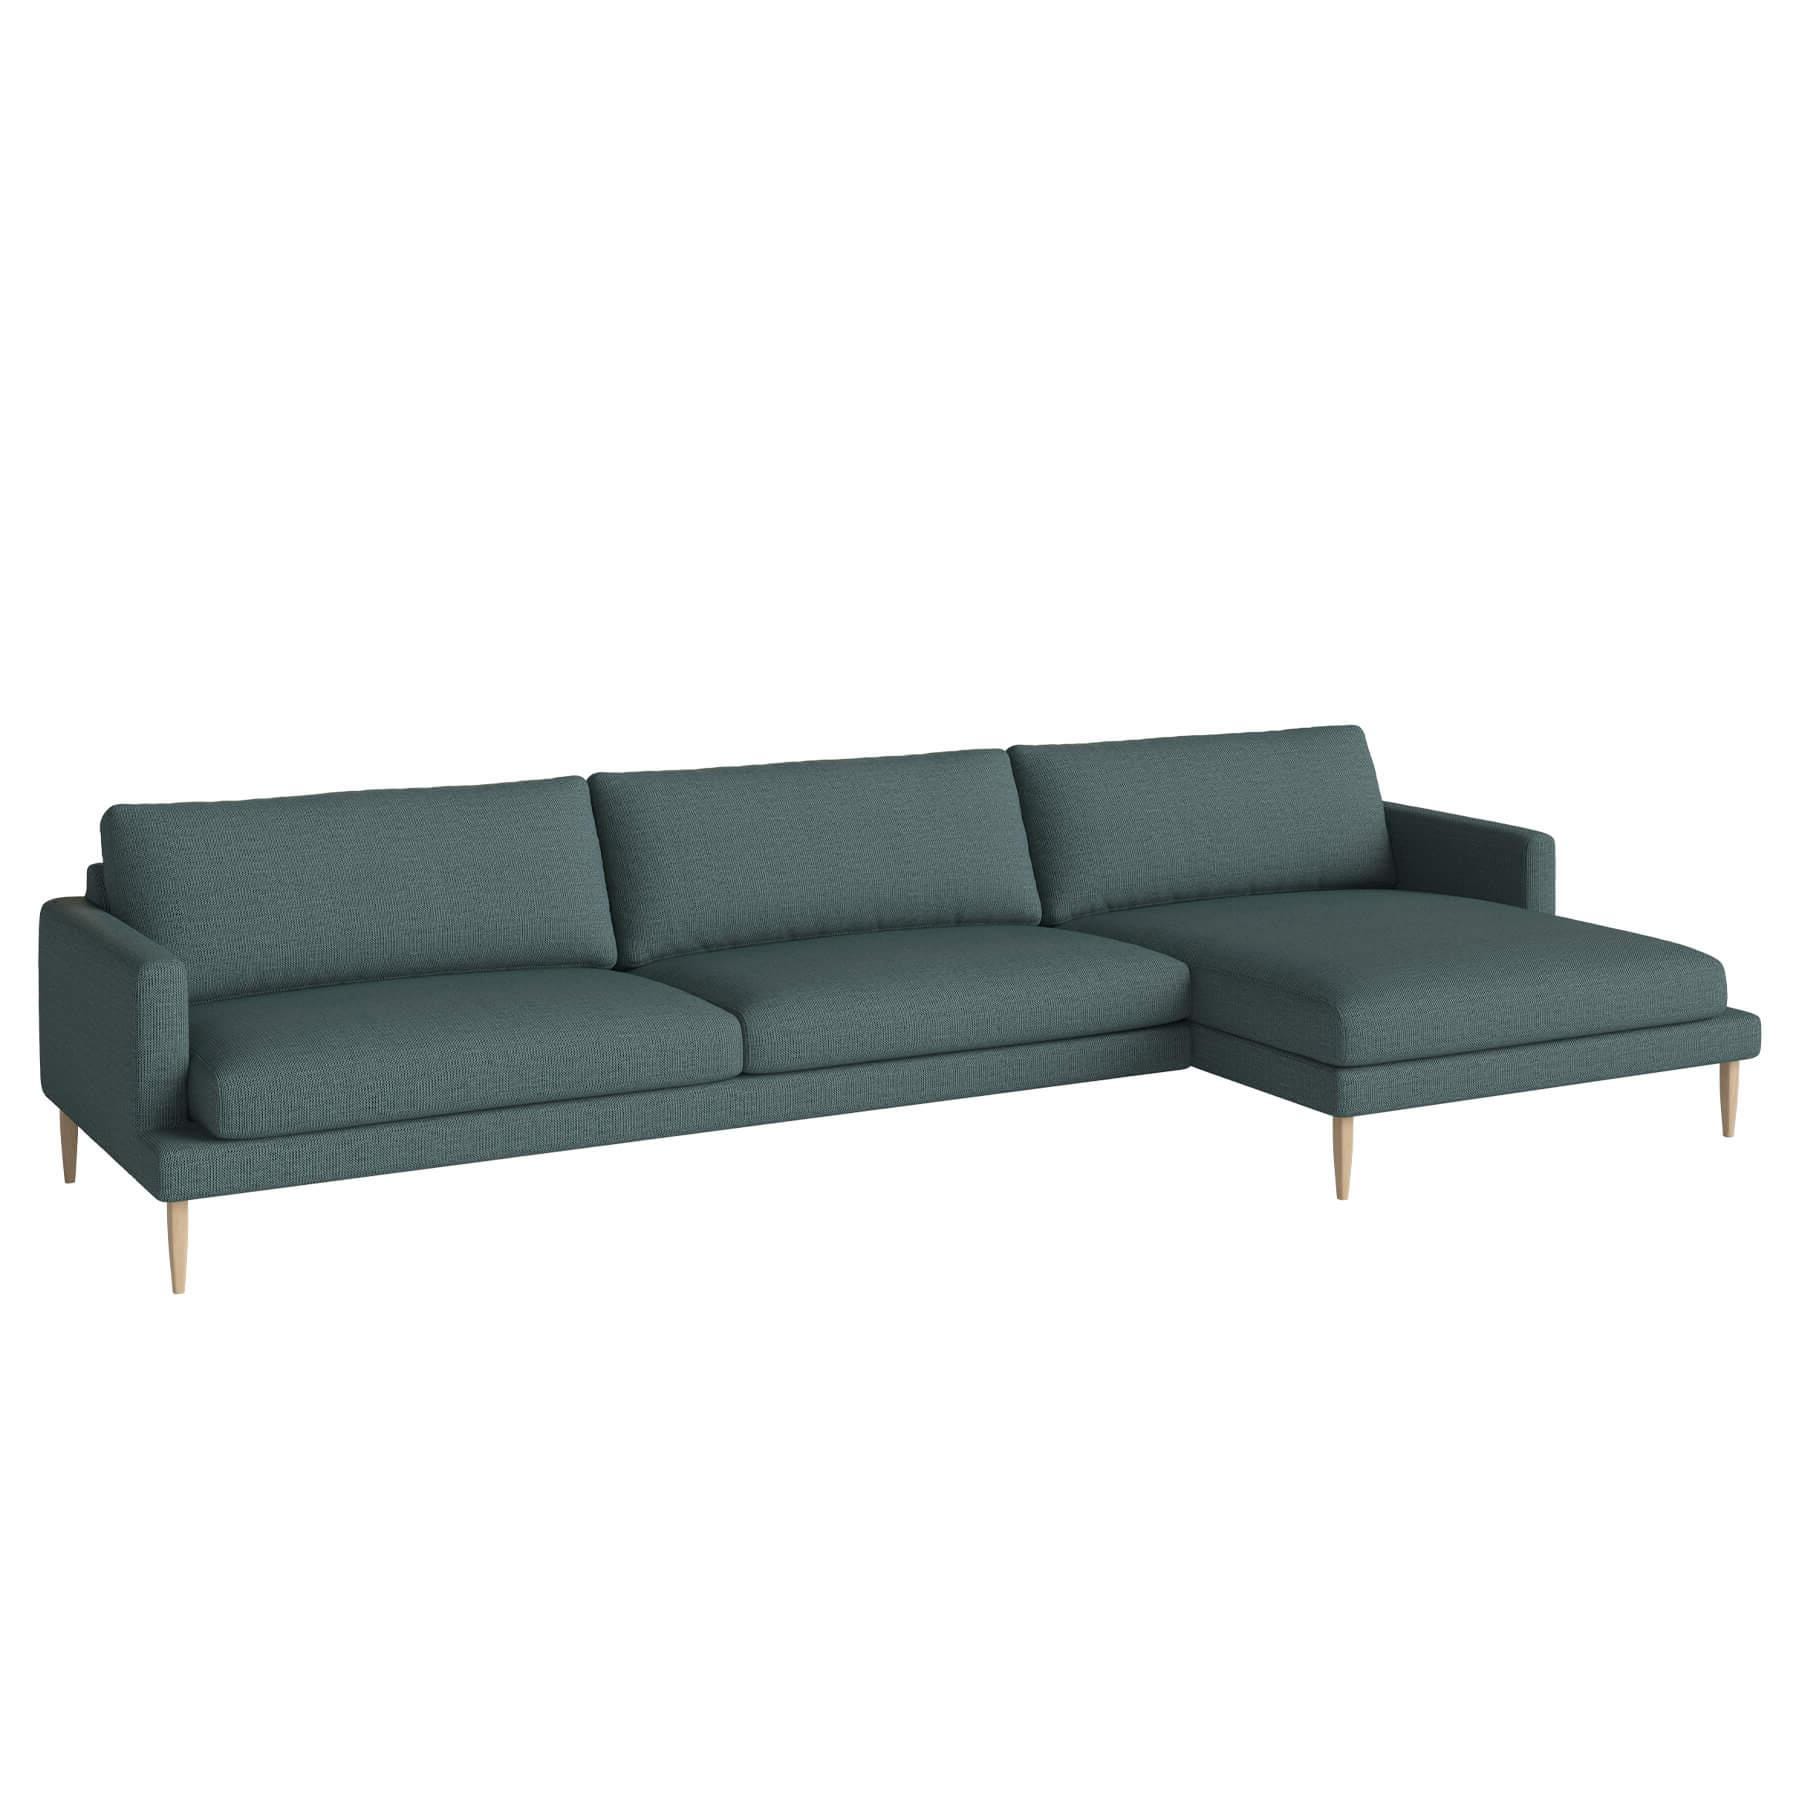 Bolia Veneda Sofa 45 Seater Sofa With Chaise Longue White Oiled Oak London Sea Green Right Green Designer Furniture From Holloways Of Ludlow